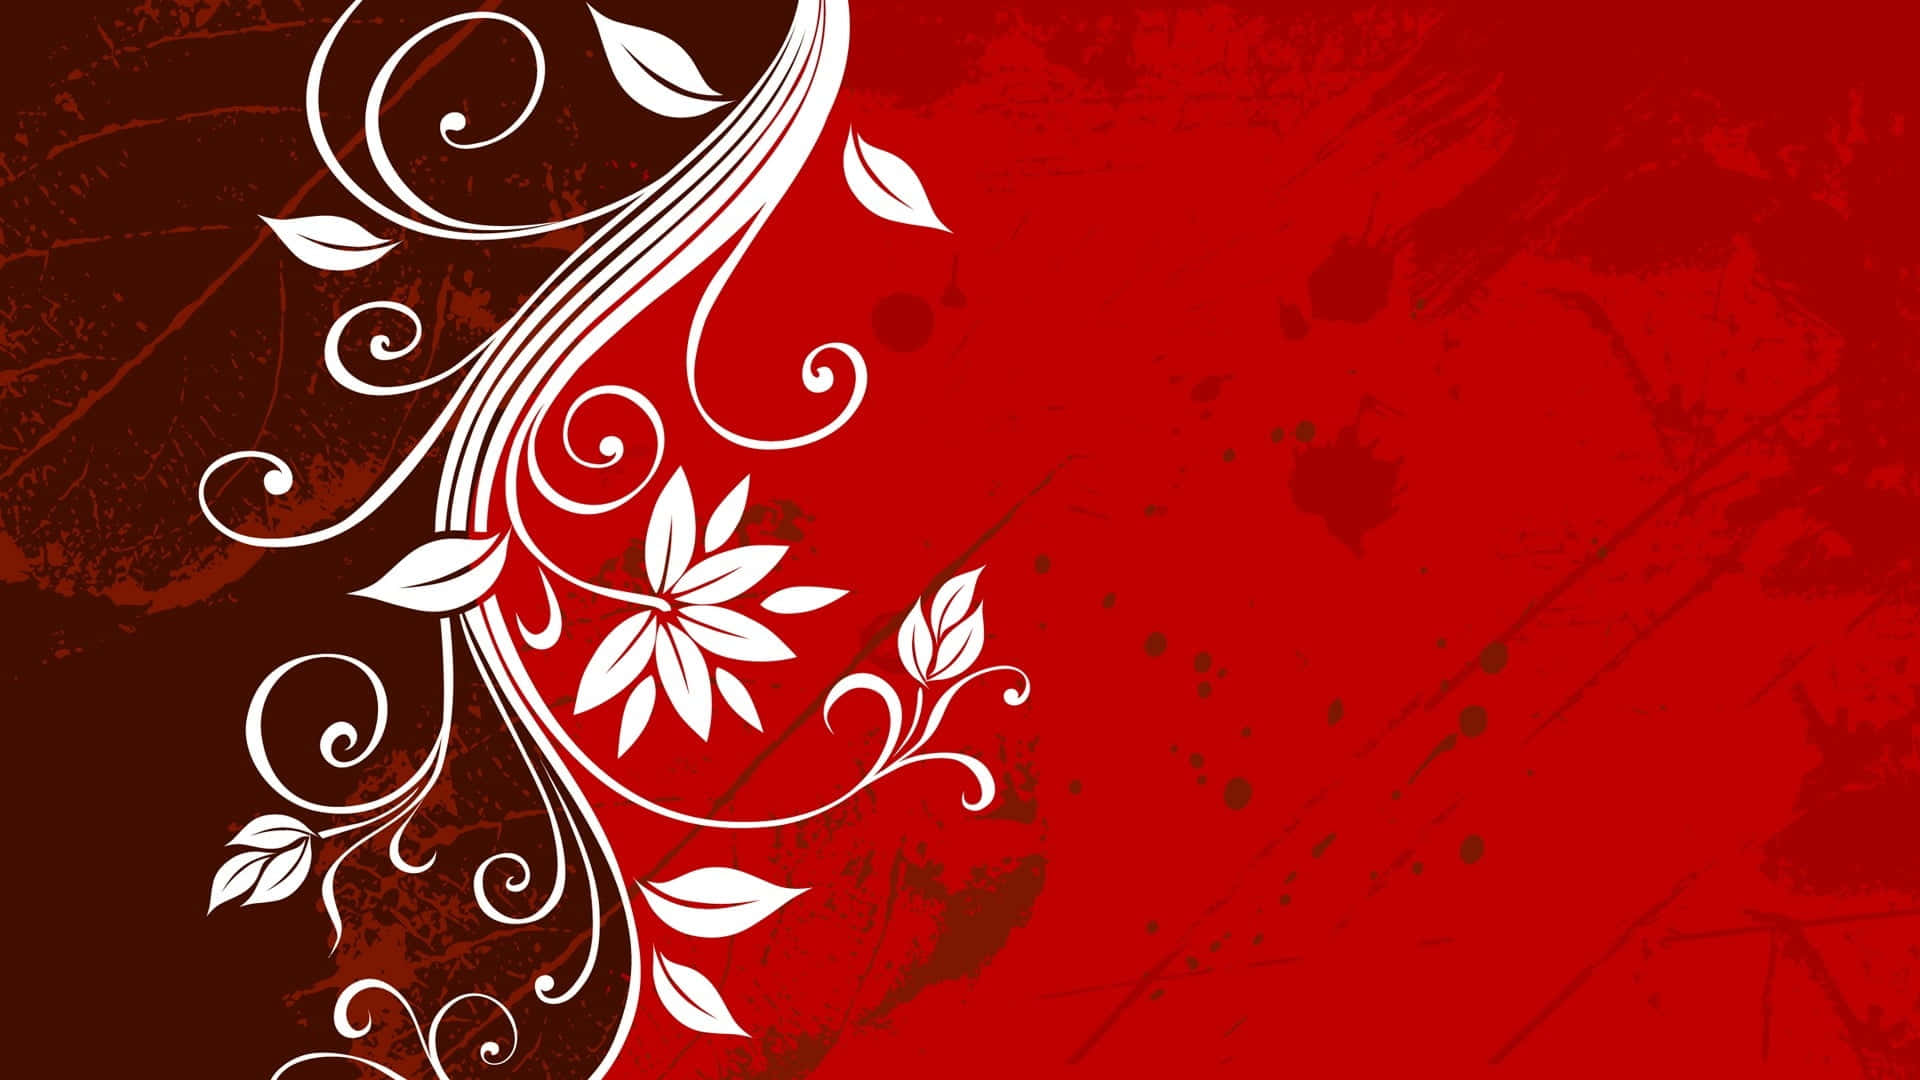 A Red Background With White Flowers And Swirls